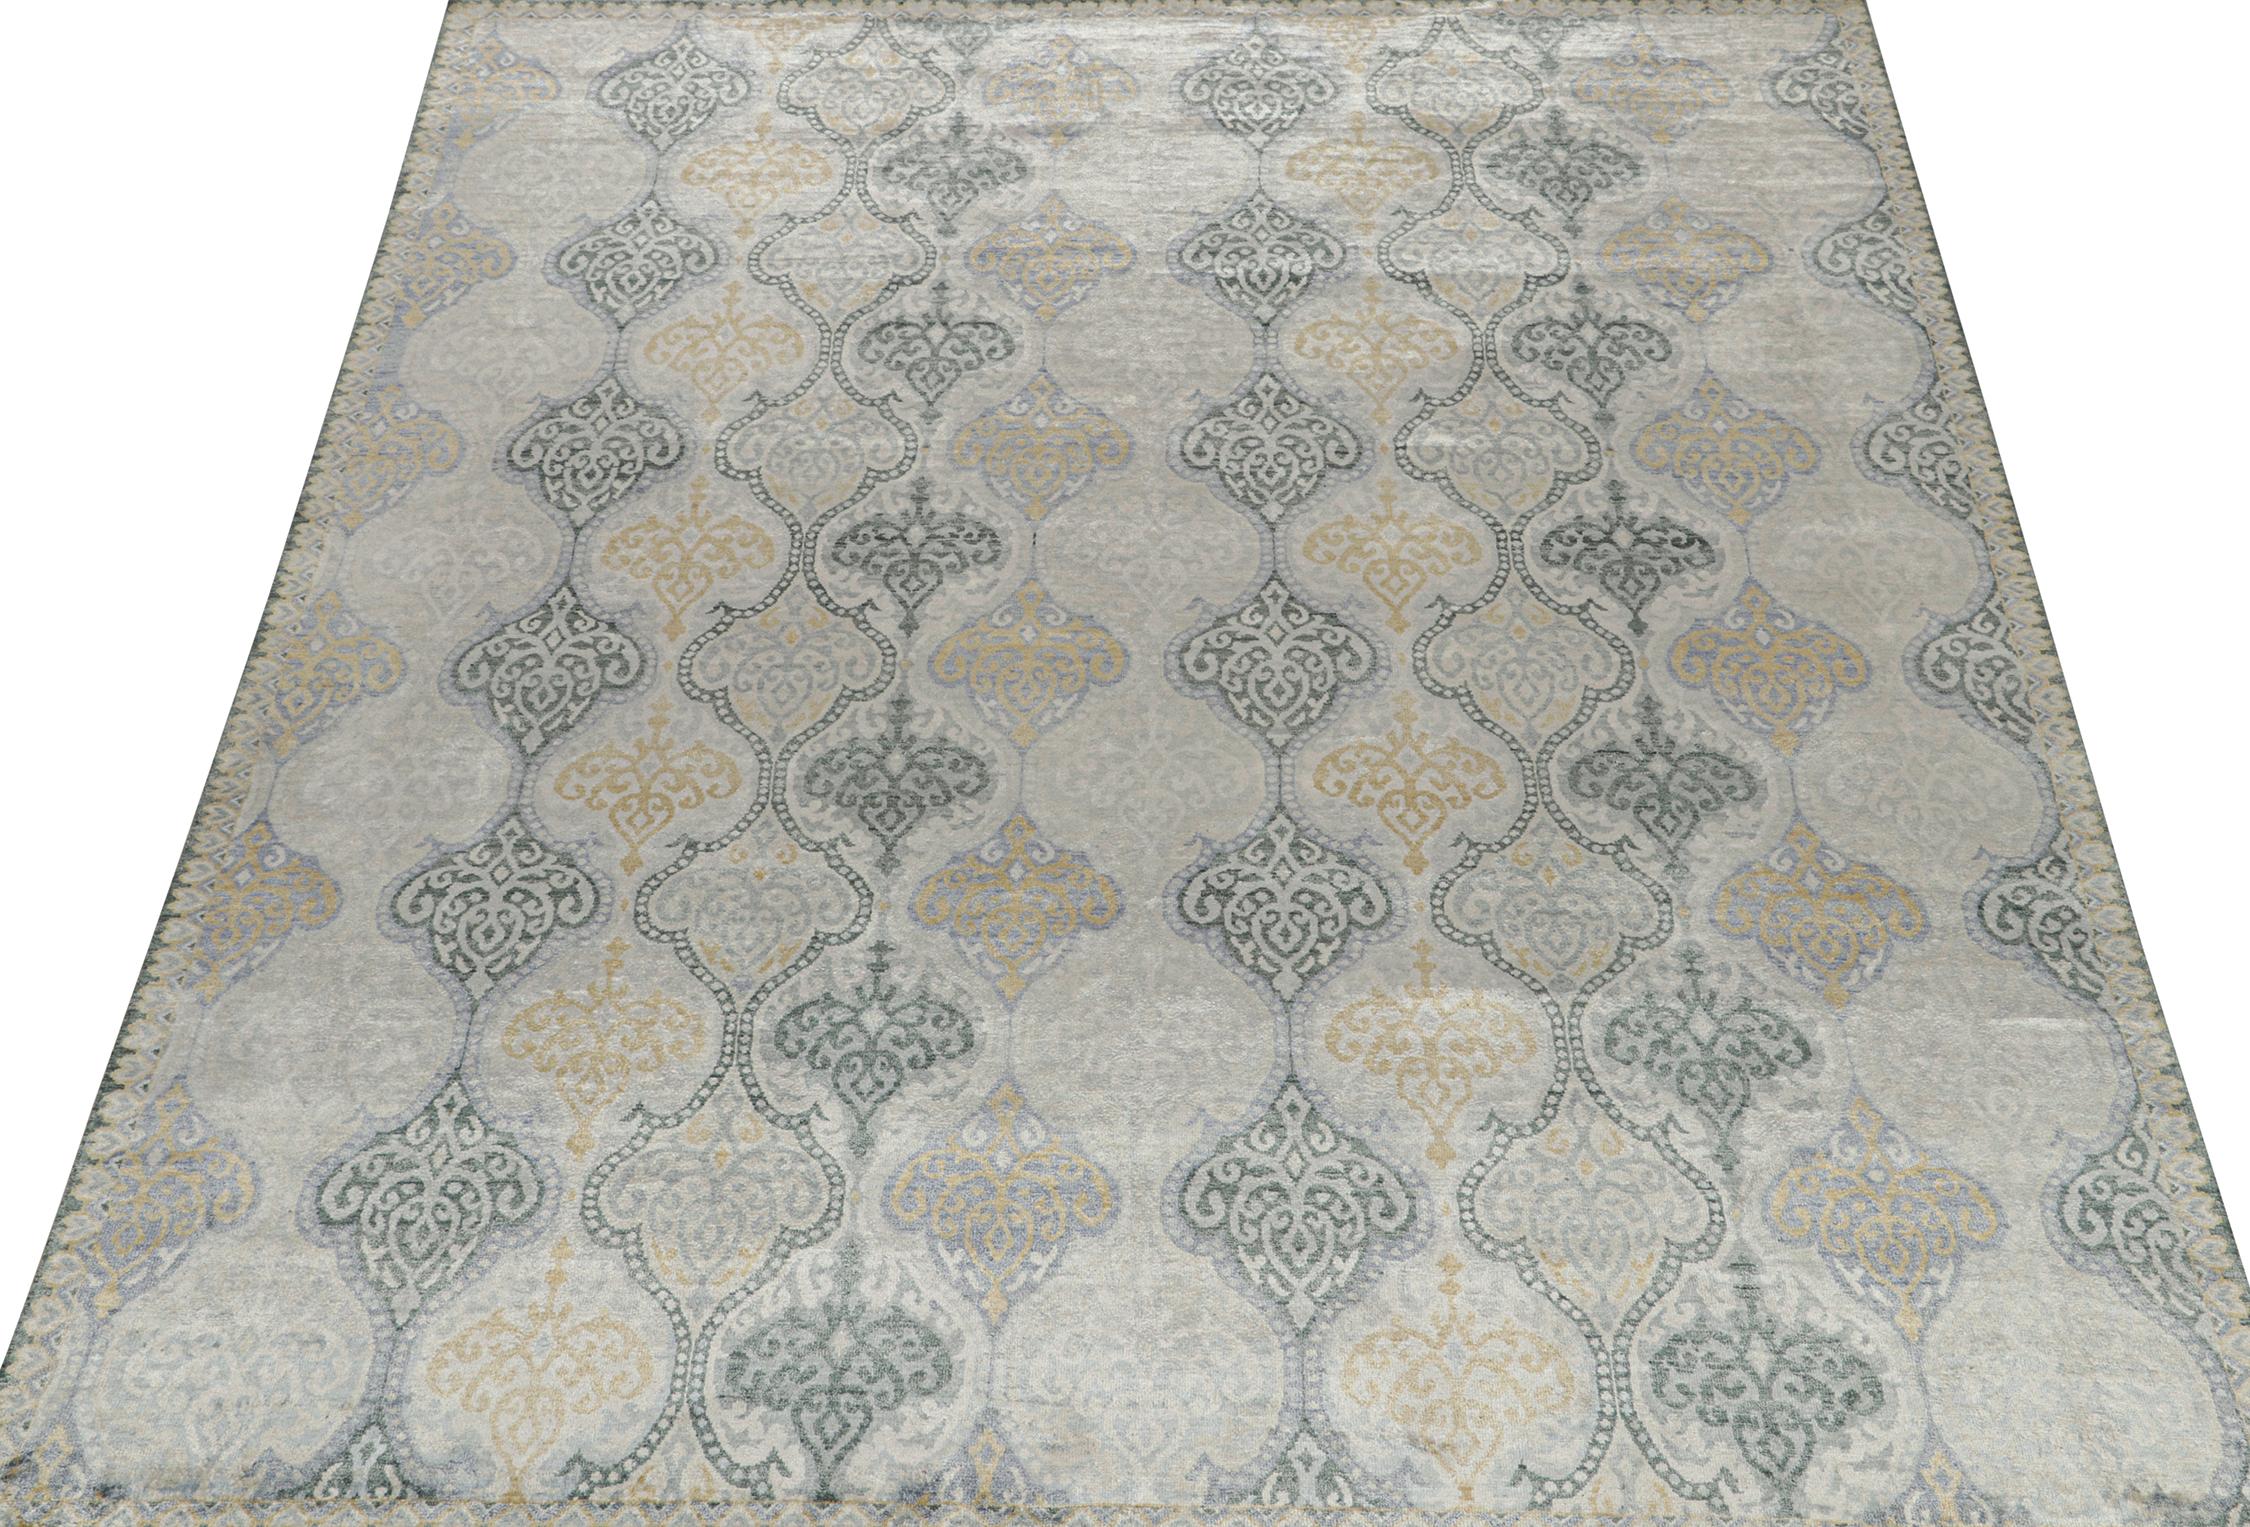 An 8x10 rug inspired from traditional rug styles, from Rug & Kilim’s Modern Classics Collection. Hand-knotted in wool, playing a confluence of gray, beige, blue and gold floral patterns with classic grace.
Further On the Design:
Keen eyes will